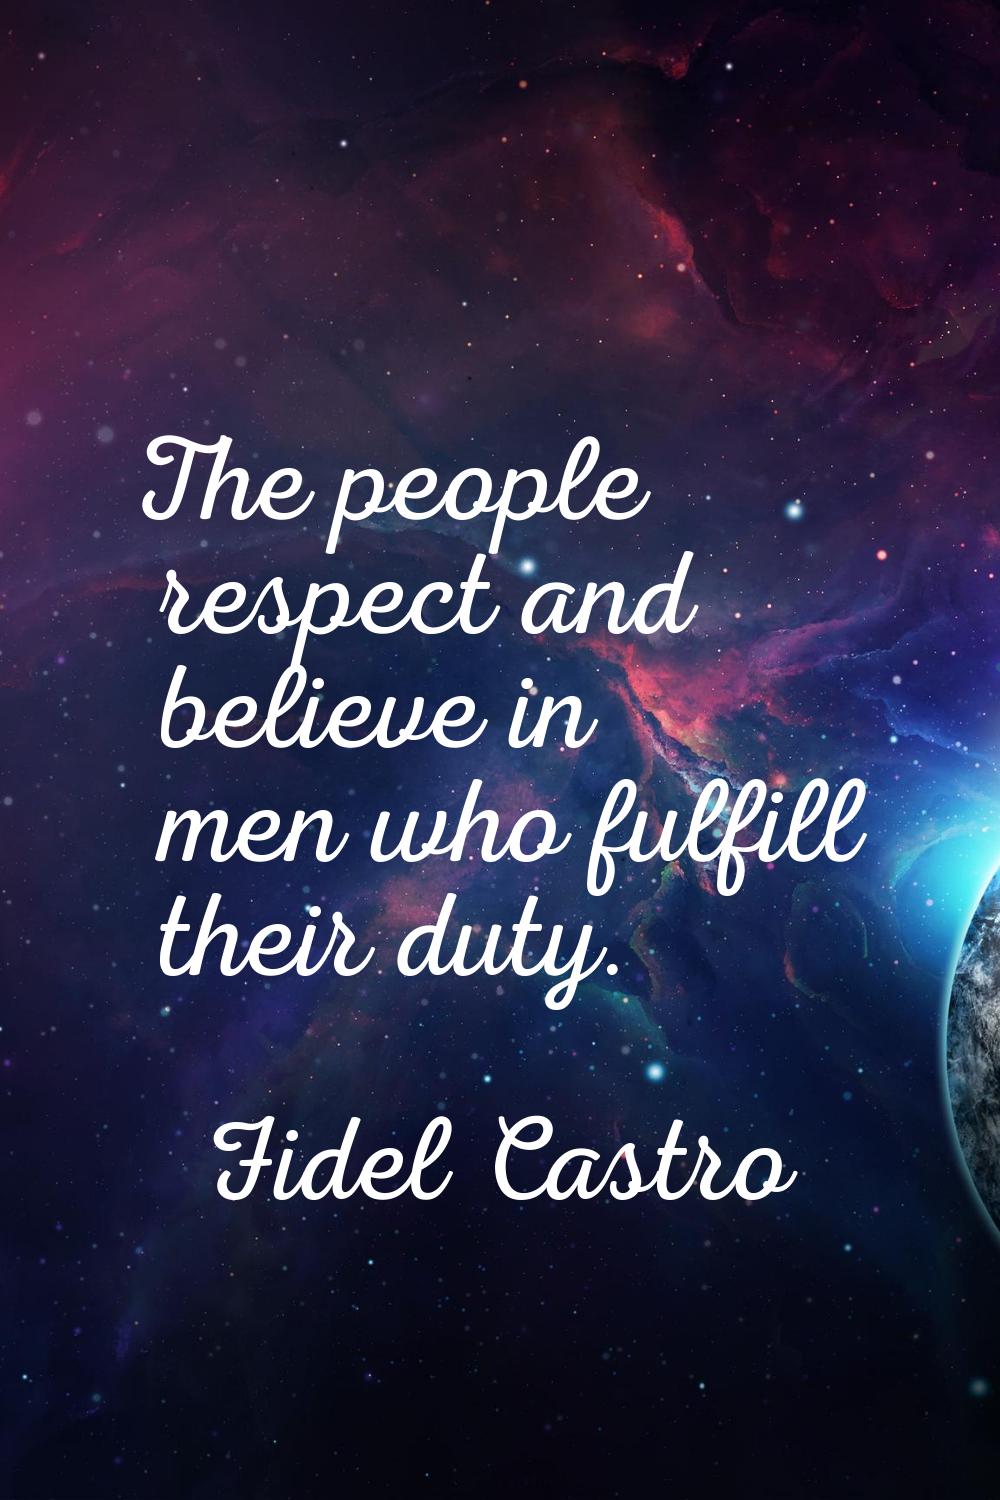 The people respect and believe in men who fulfill their duty.